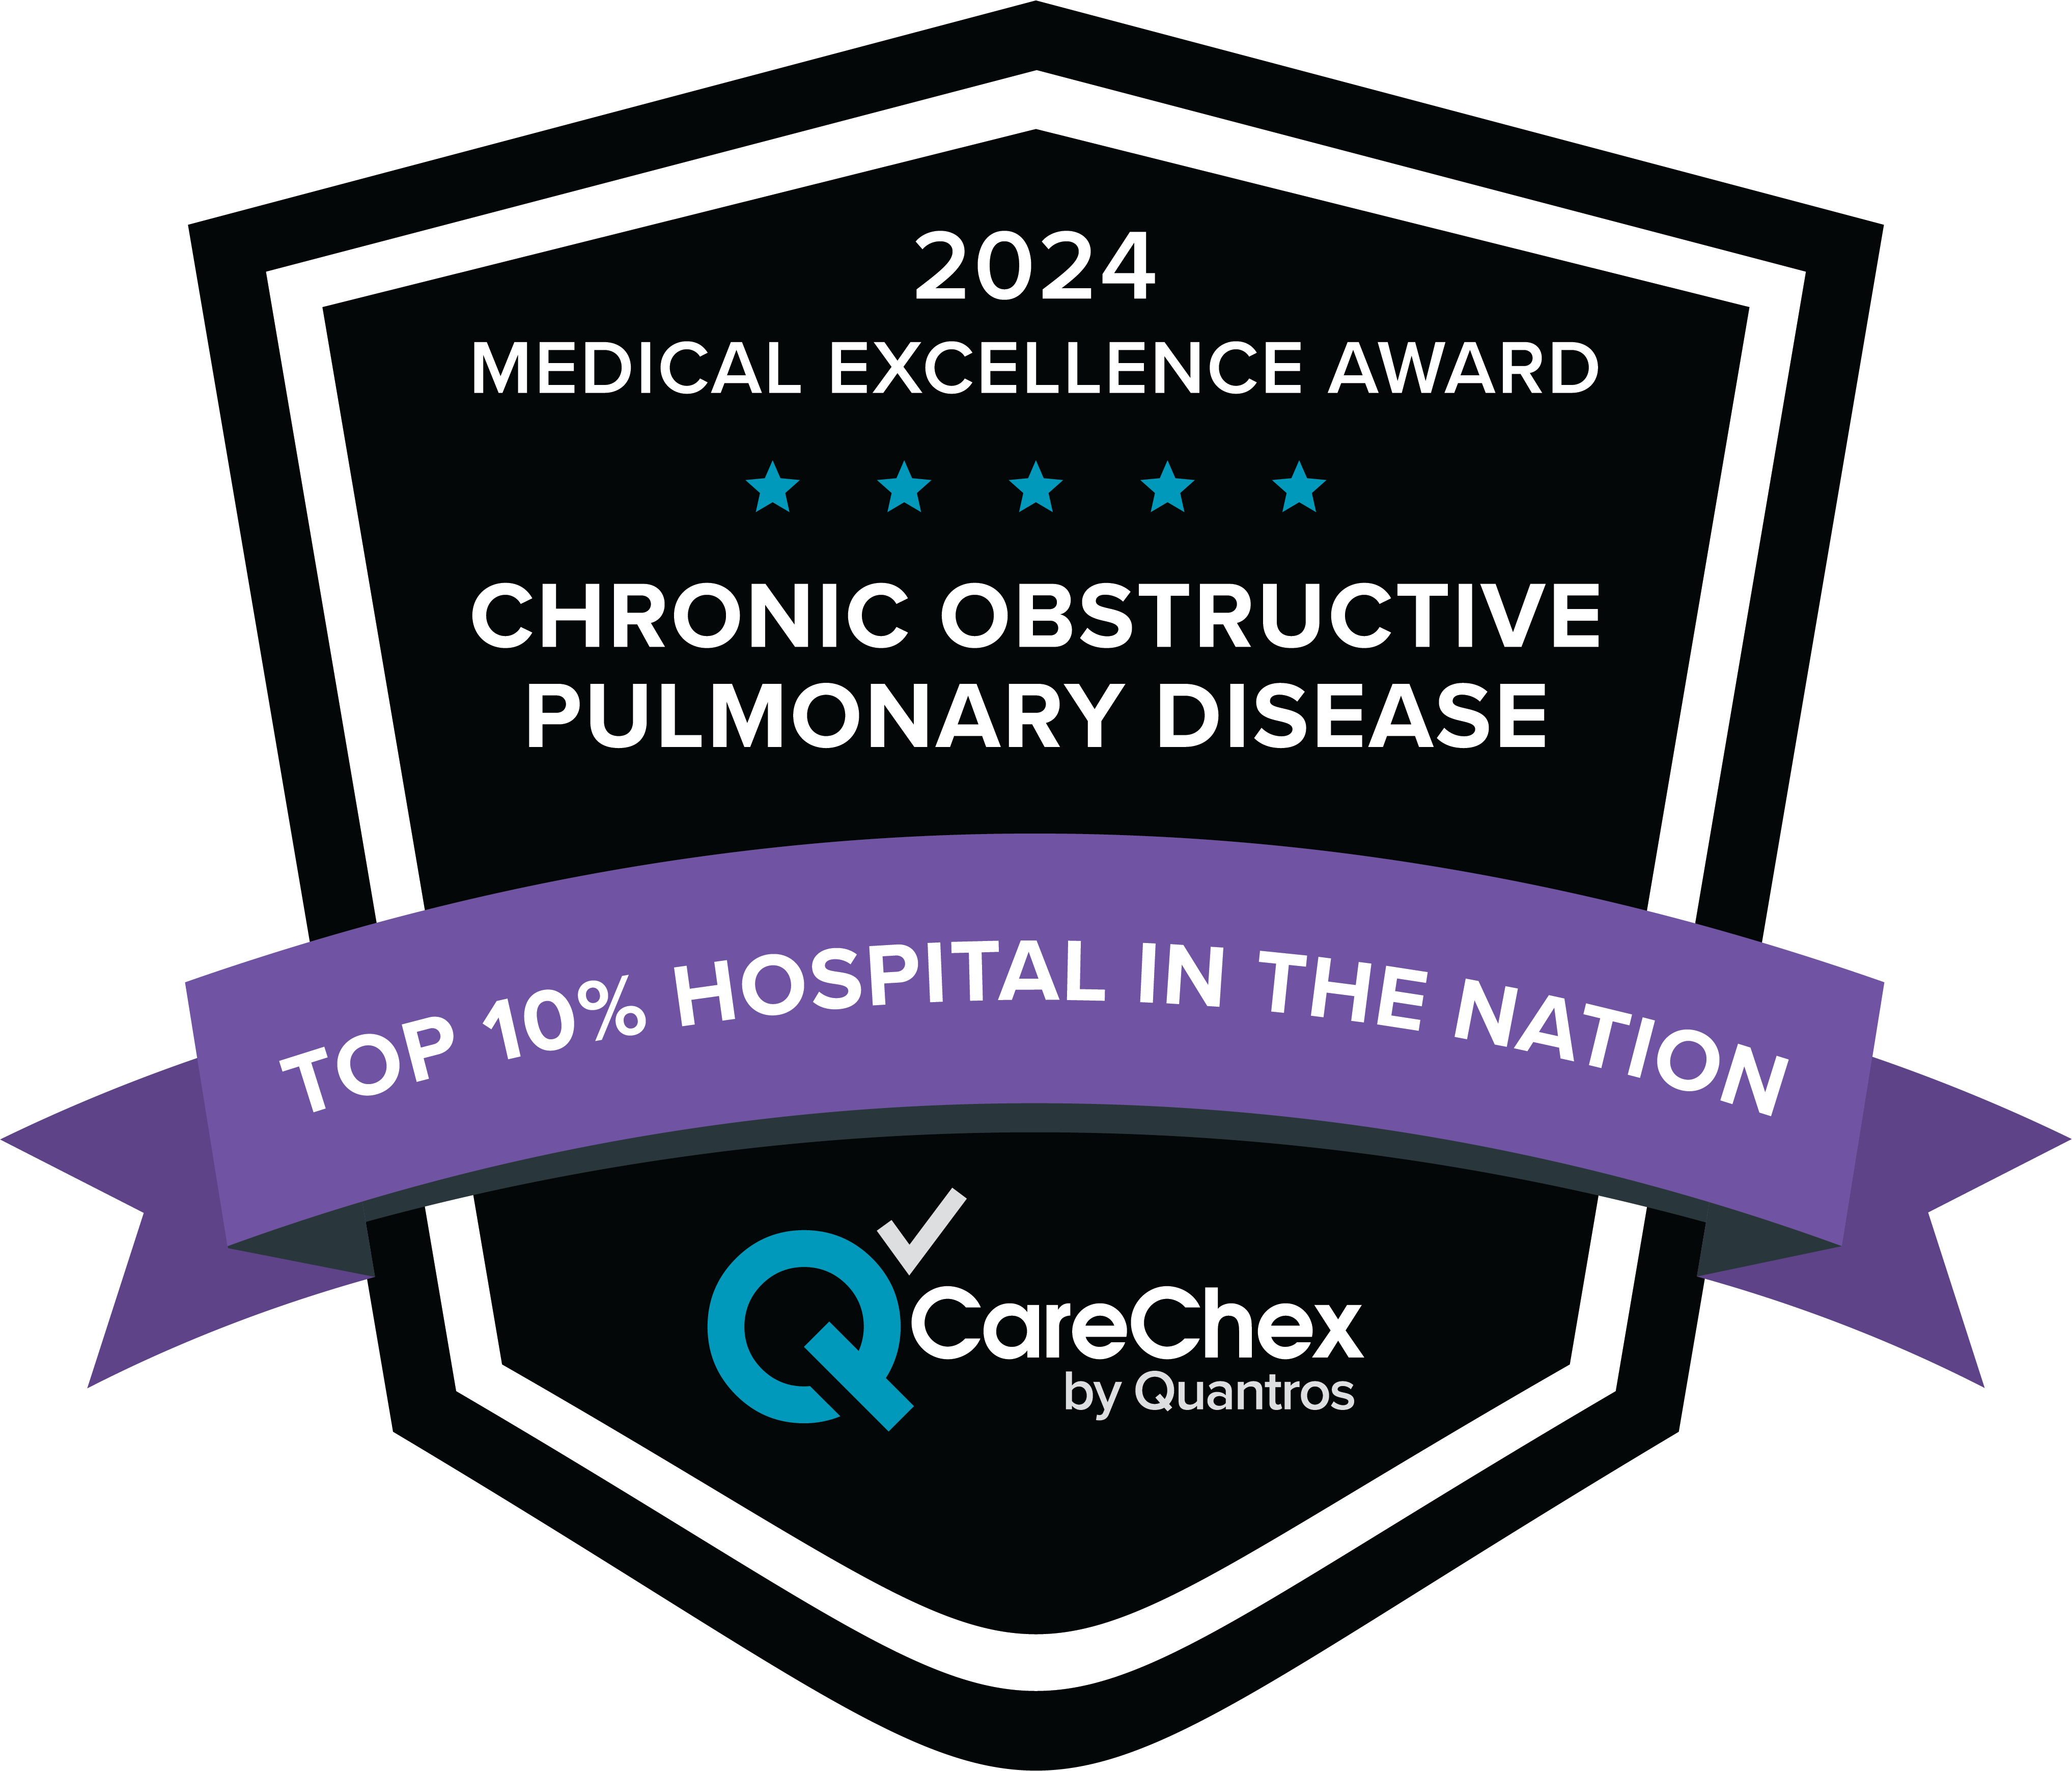 Awards badge for Top 10% Hospital in the Nation for Medical Excellence in COPD Care – 2024 CareChex by Quantros